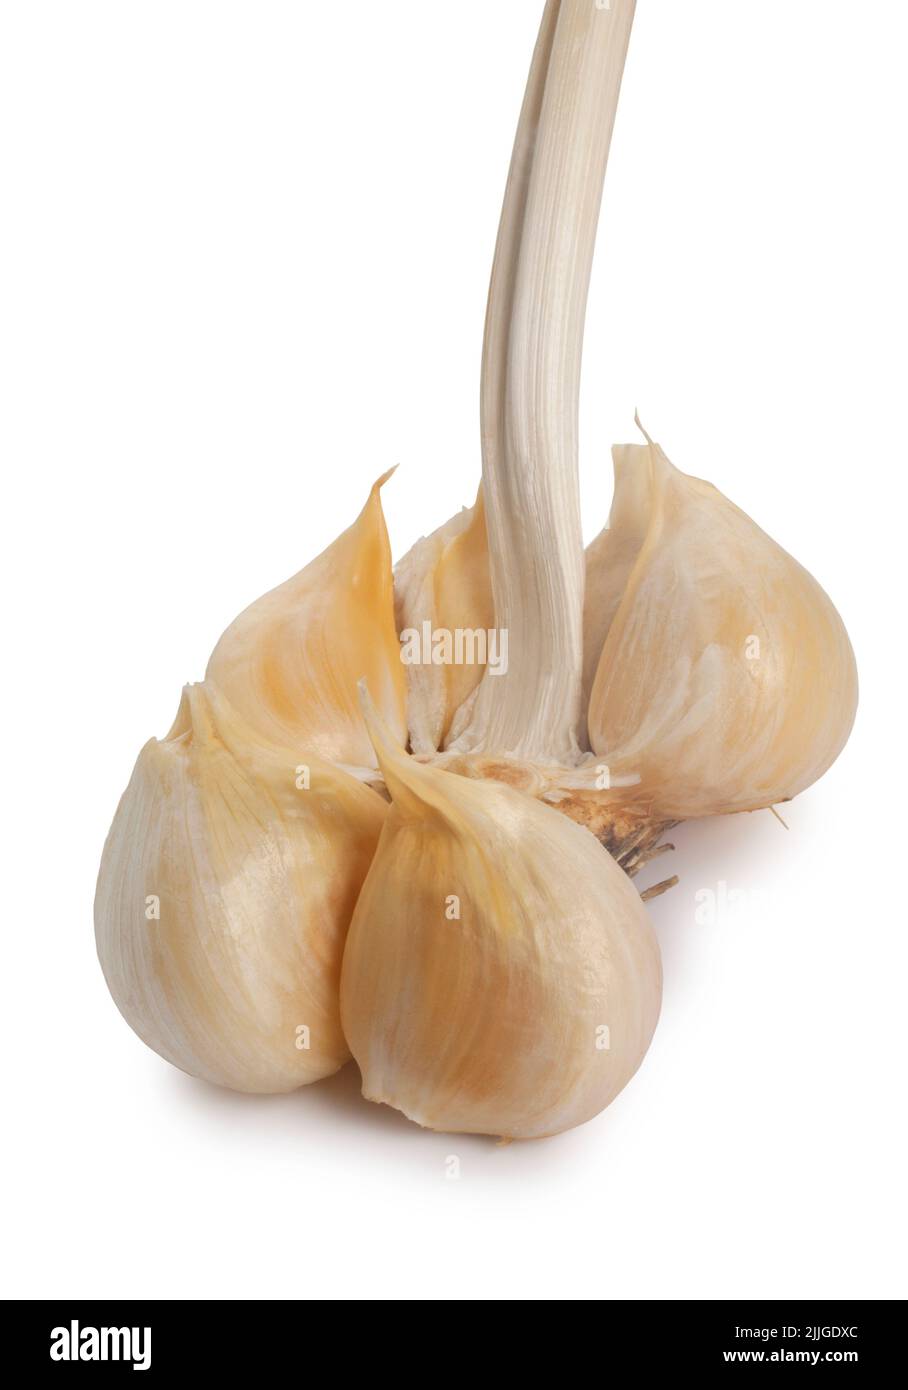 Studio shot of freshly harvested Elephant Garlic cut out against a white background - John Gollop Stock Photo